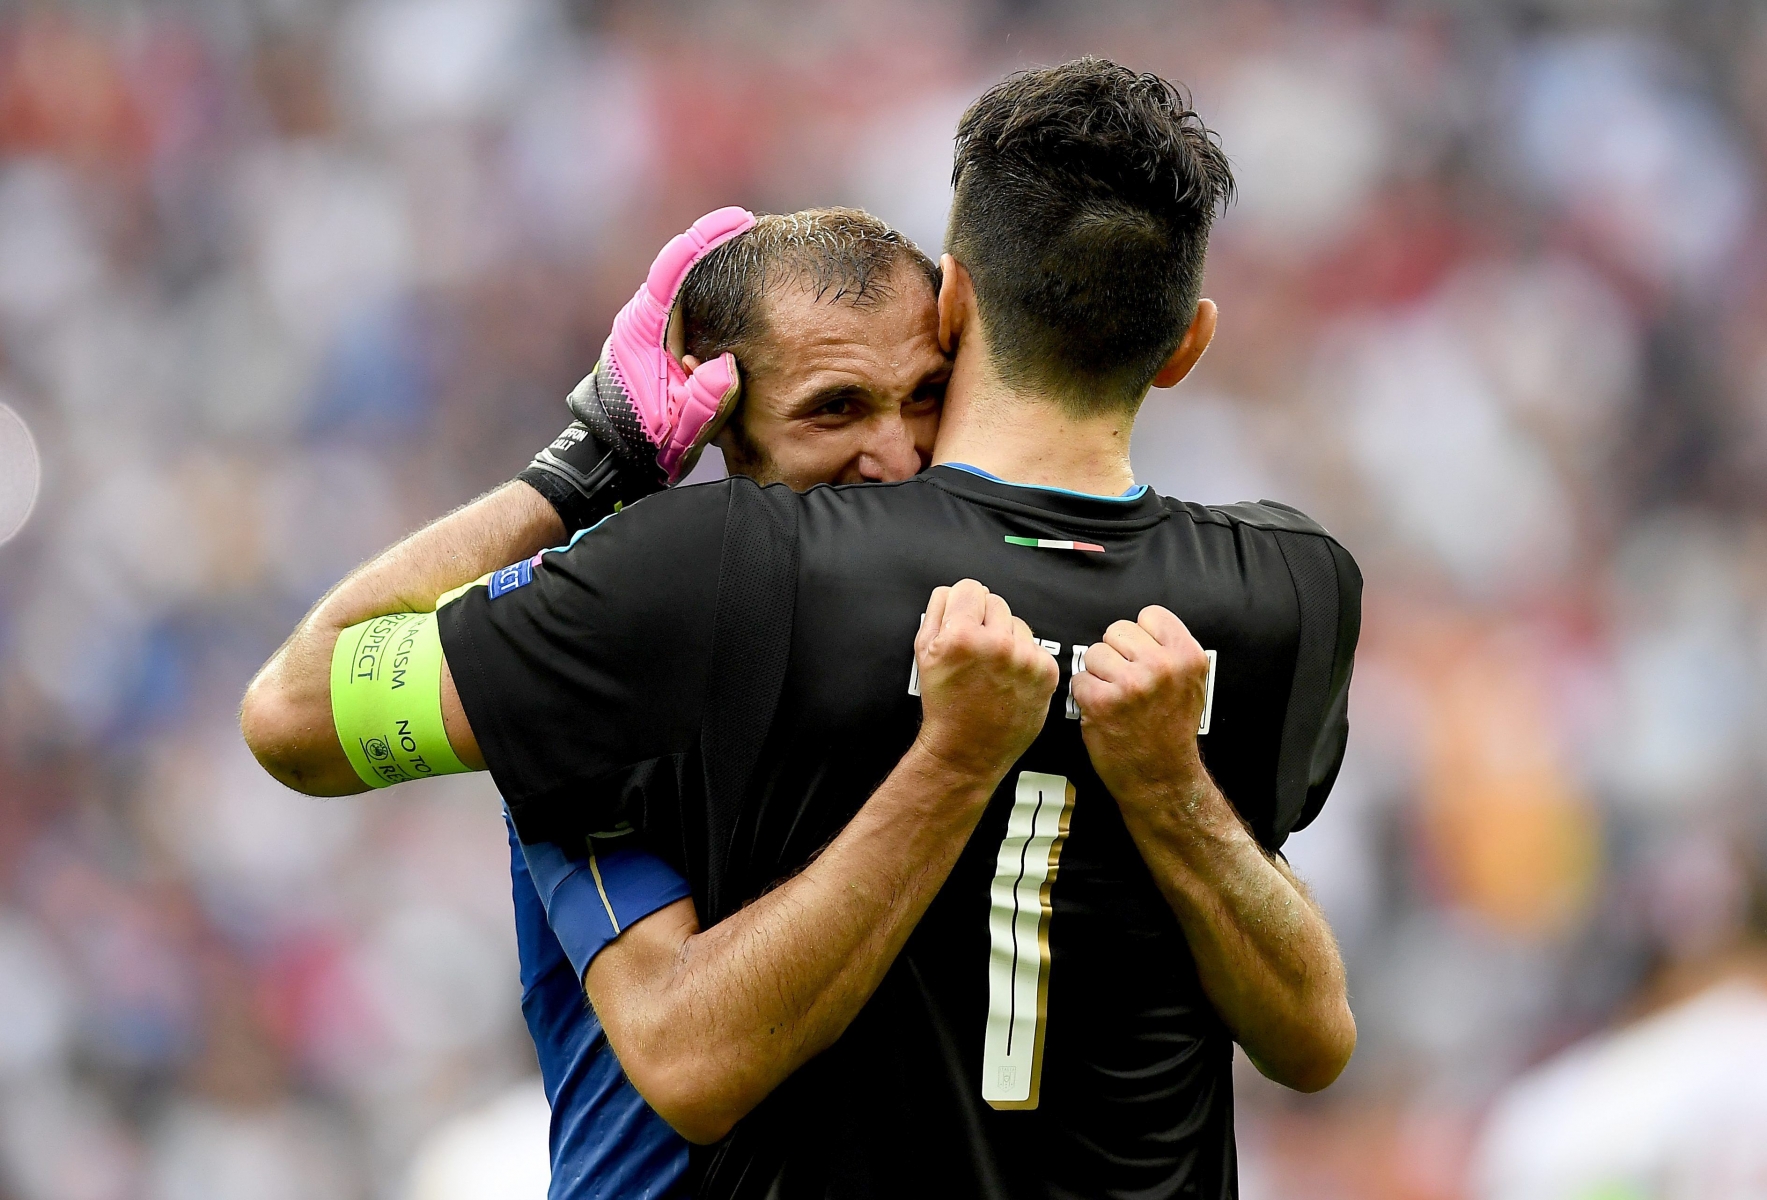 epa05394955 Goalkeeper Gianluigi Buffon of Italy (R) and Giorgio Chiellini of Italy react after the UEFA EURO 2016 round of 16 match between Italy and Spain at Stade de France in St. Denis, France, 27 June 2016. ....(RESTRICTIONS APPLY: For editorial news reporting purposes only. Not used for commercial or marketing purposes without prior written approval of UEFA. Images must appear as still images and must not emulate match action video footage. Photographs published in online publications (whether via the Internet or otherwise) shall have an interval of at least 20 seconds between the posting.)  EPA/GEORGI LICOVSKI   EDITORIAL USE ONLY